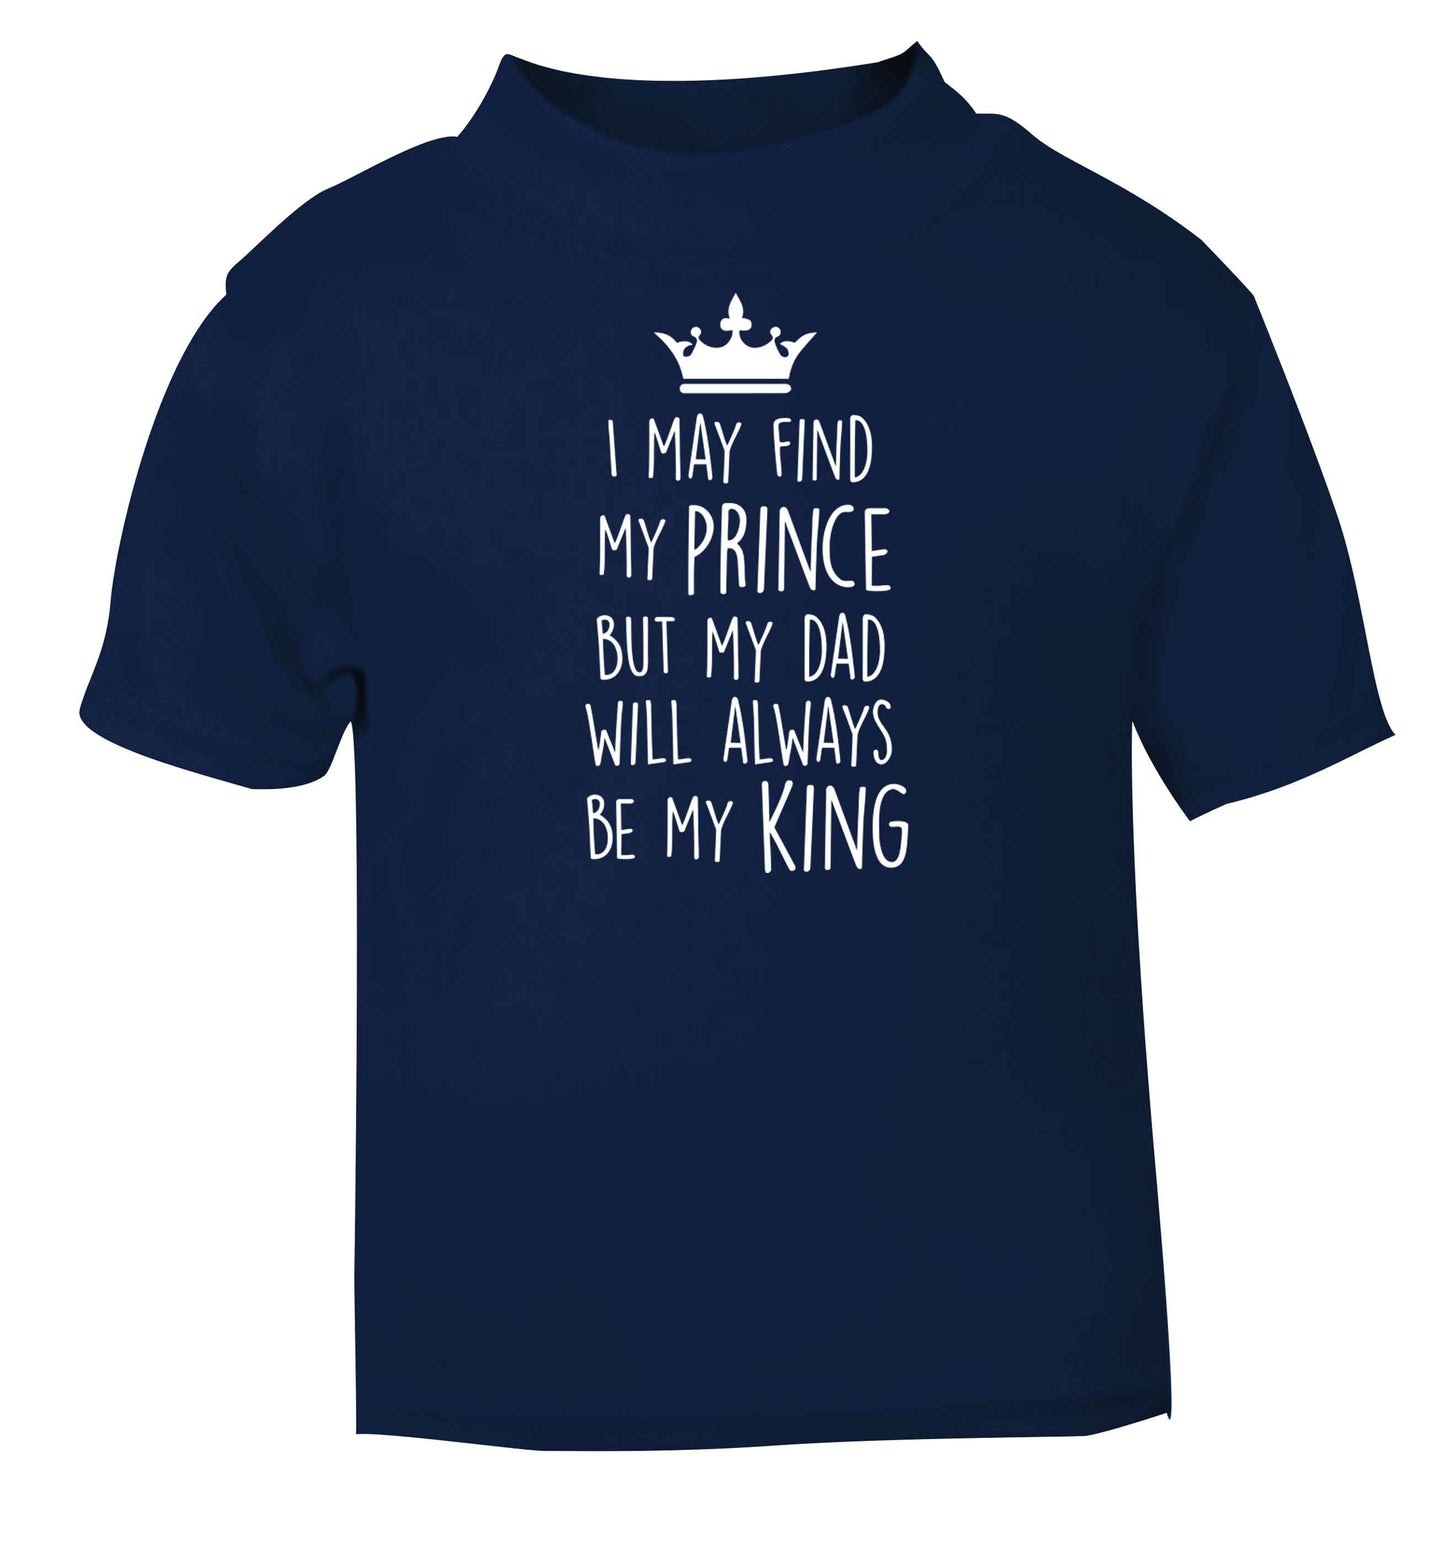 I may find my prince but my dad will always be my king navy baby toddler Tshirt 2 Years